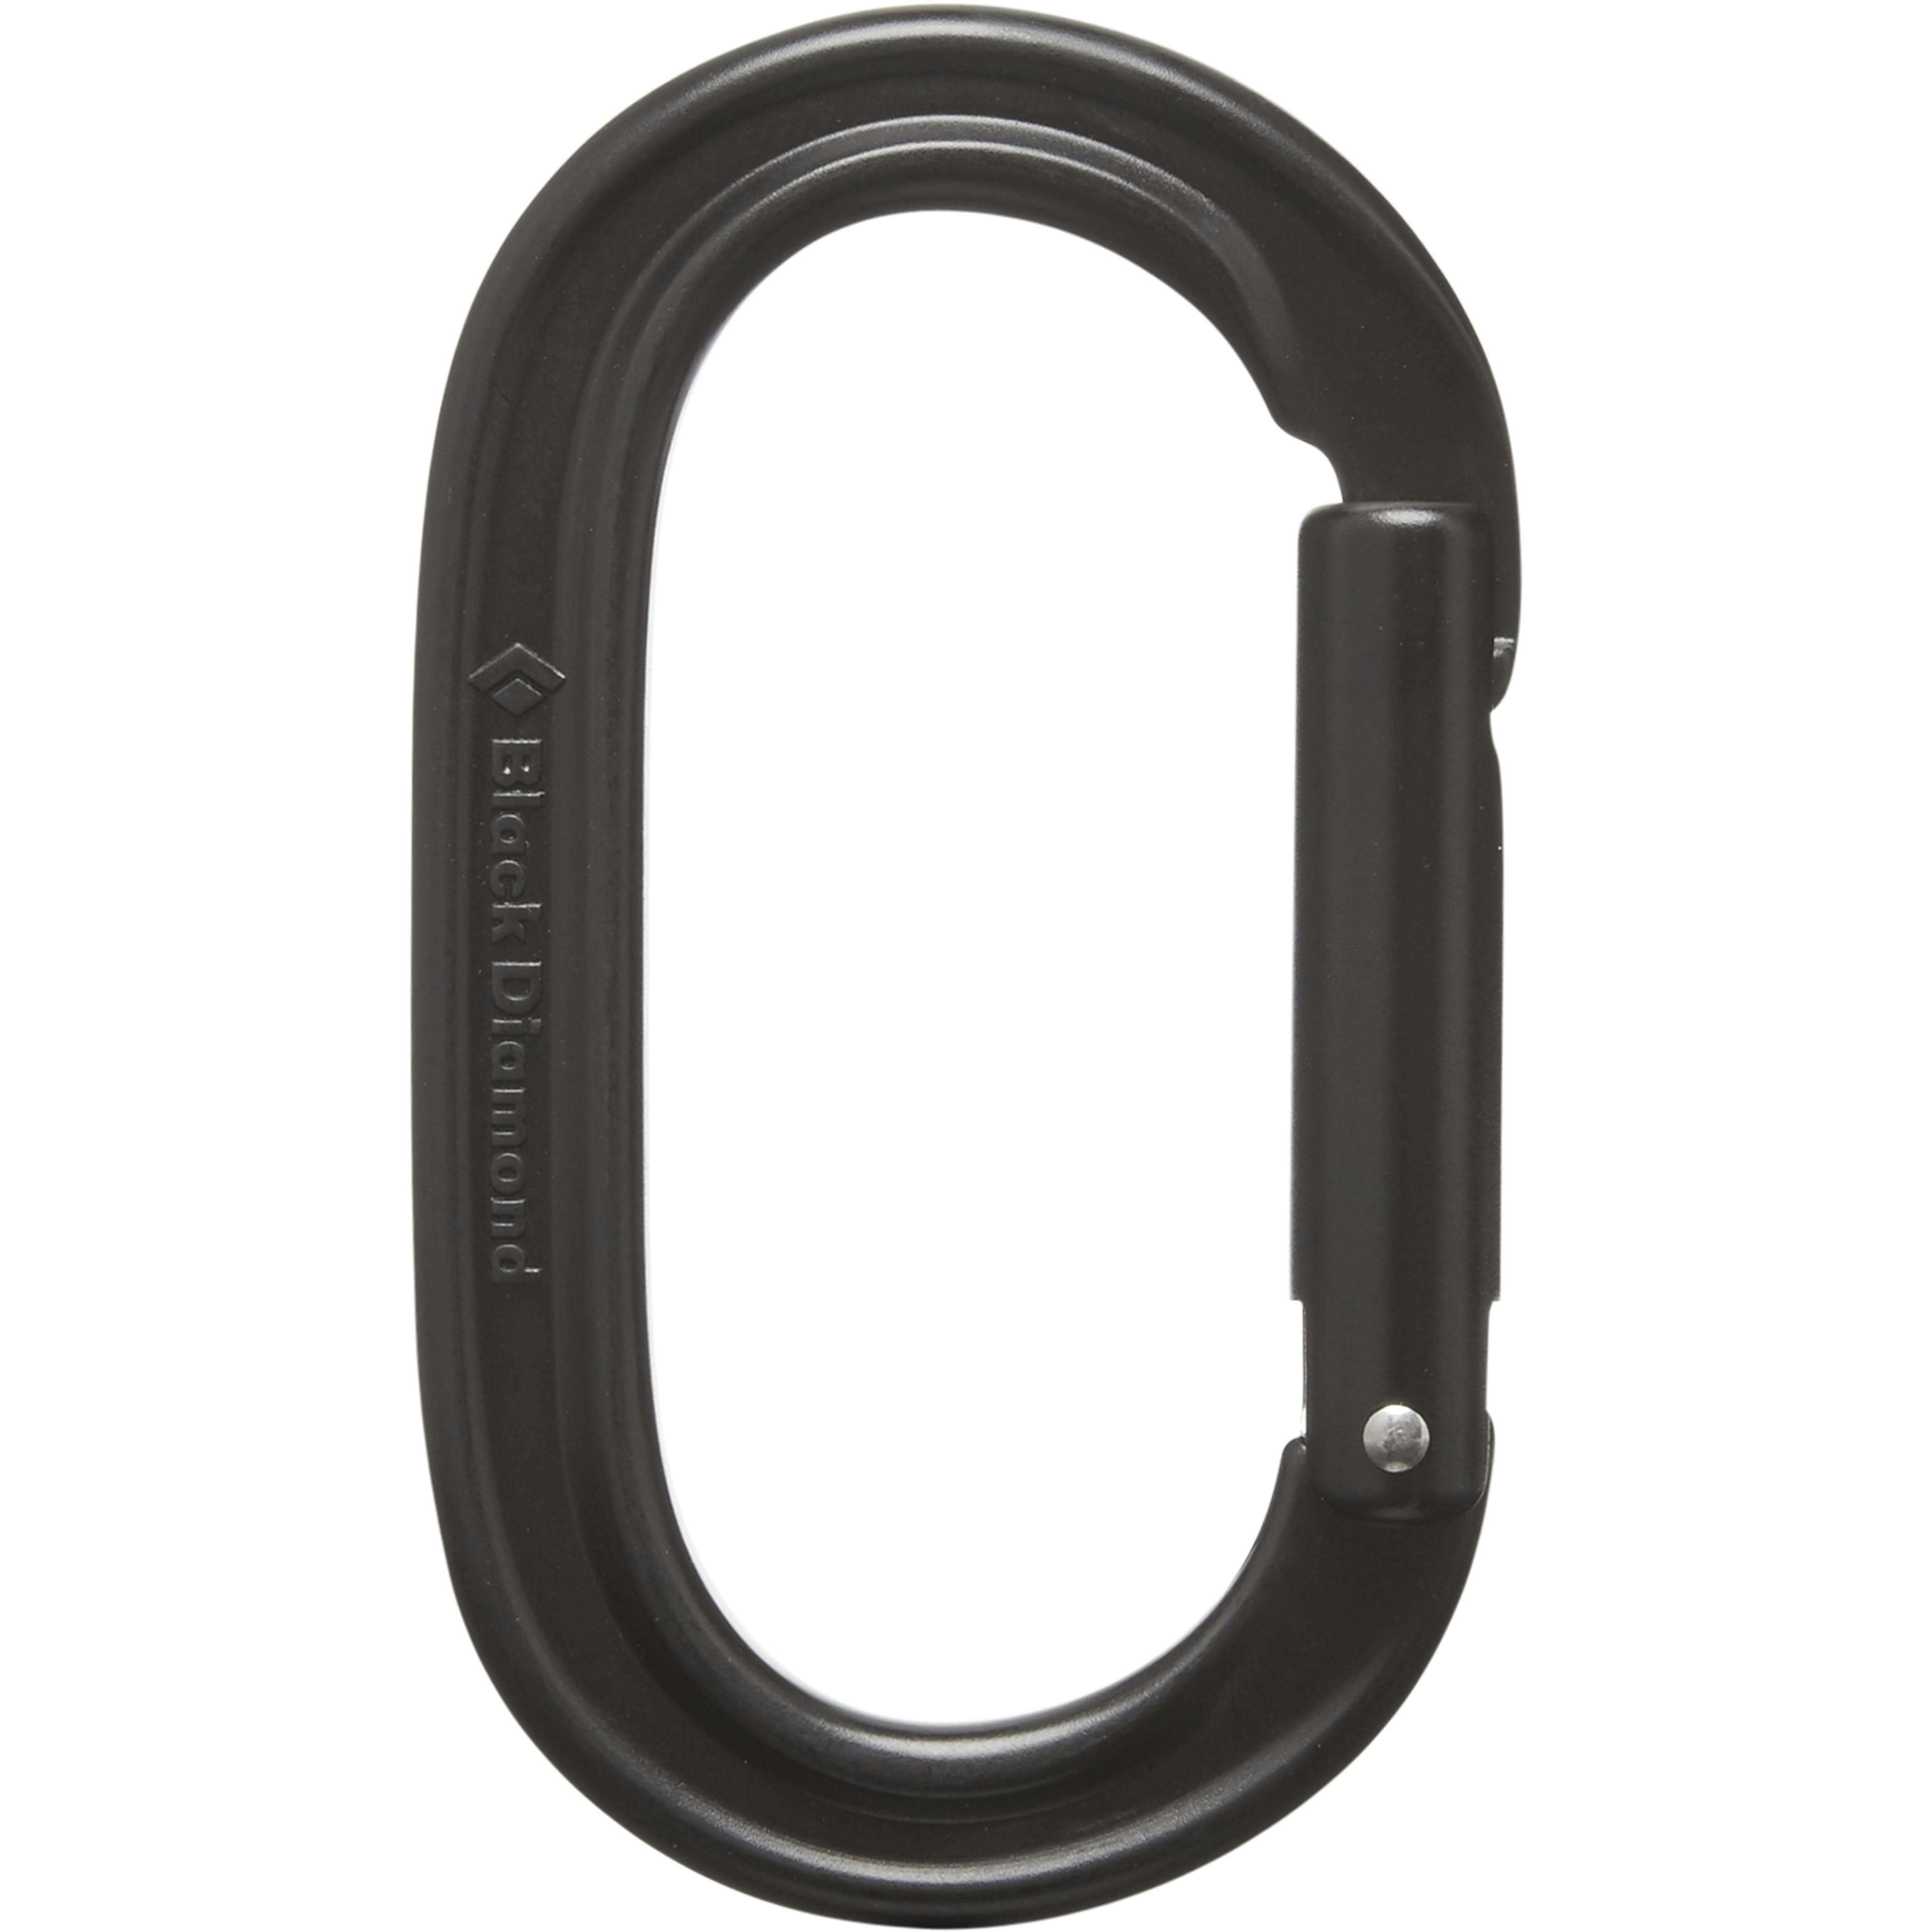 Oval shaped carabiner